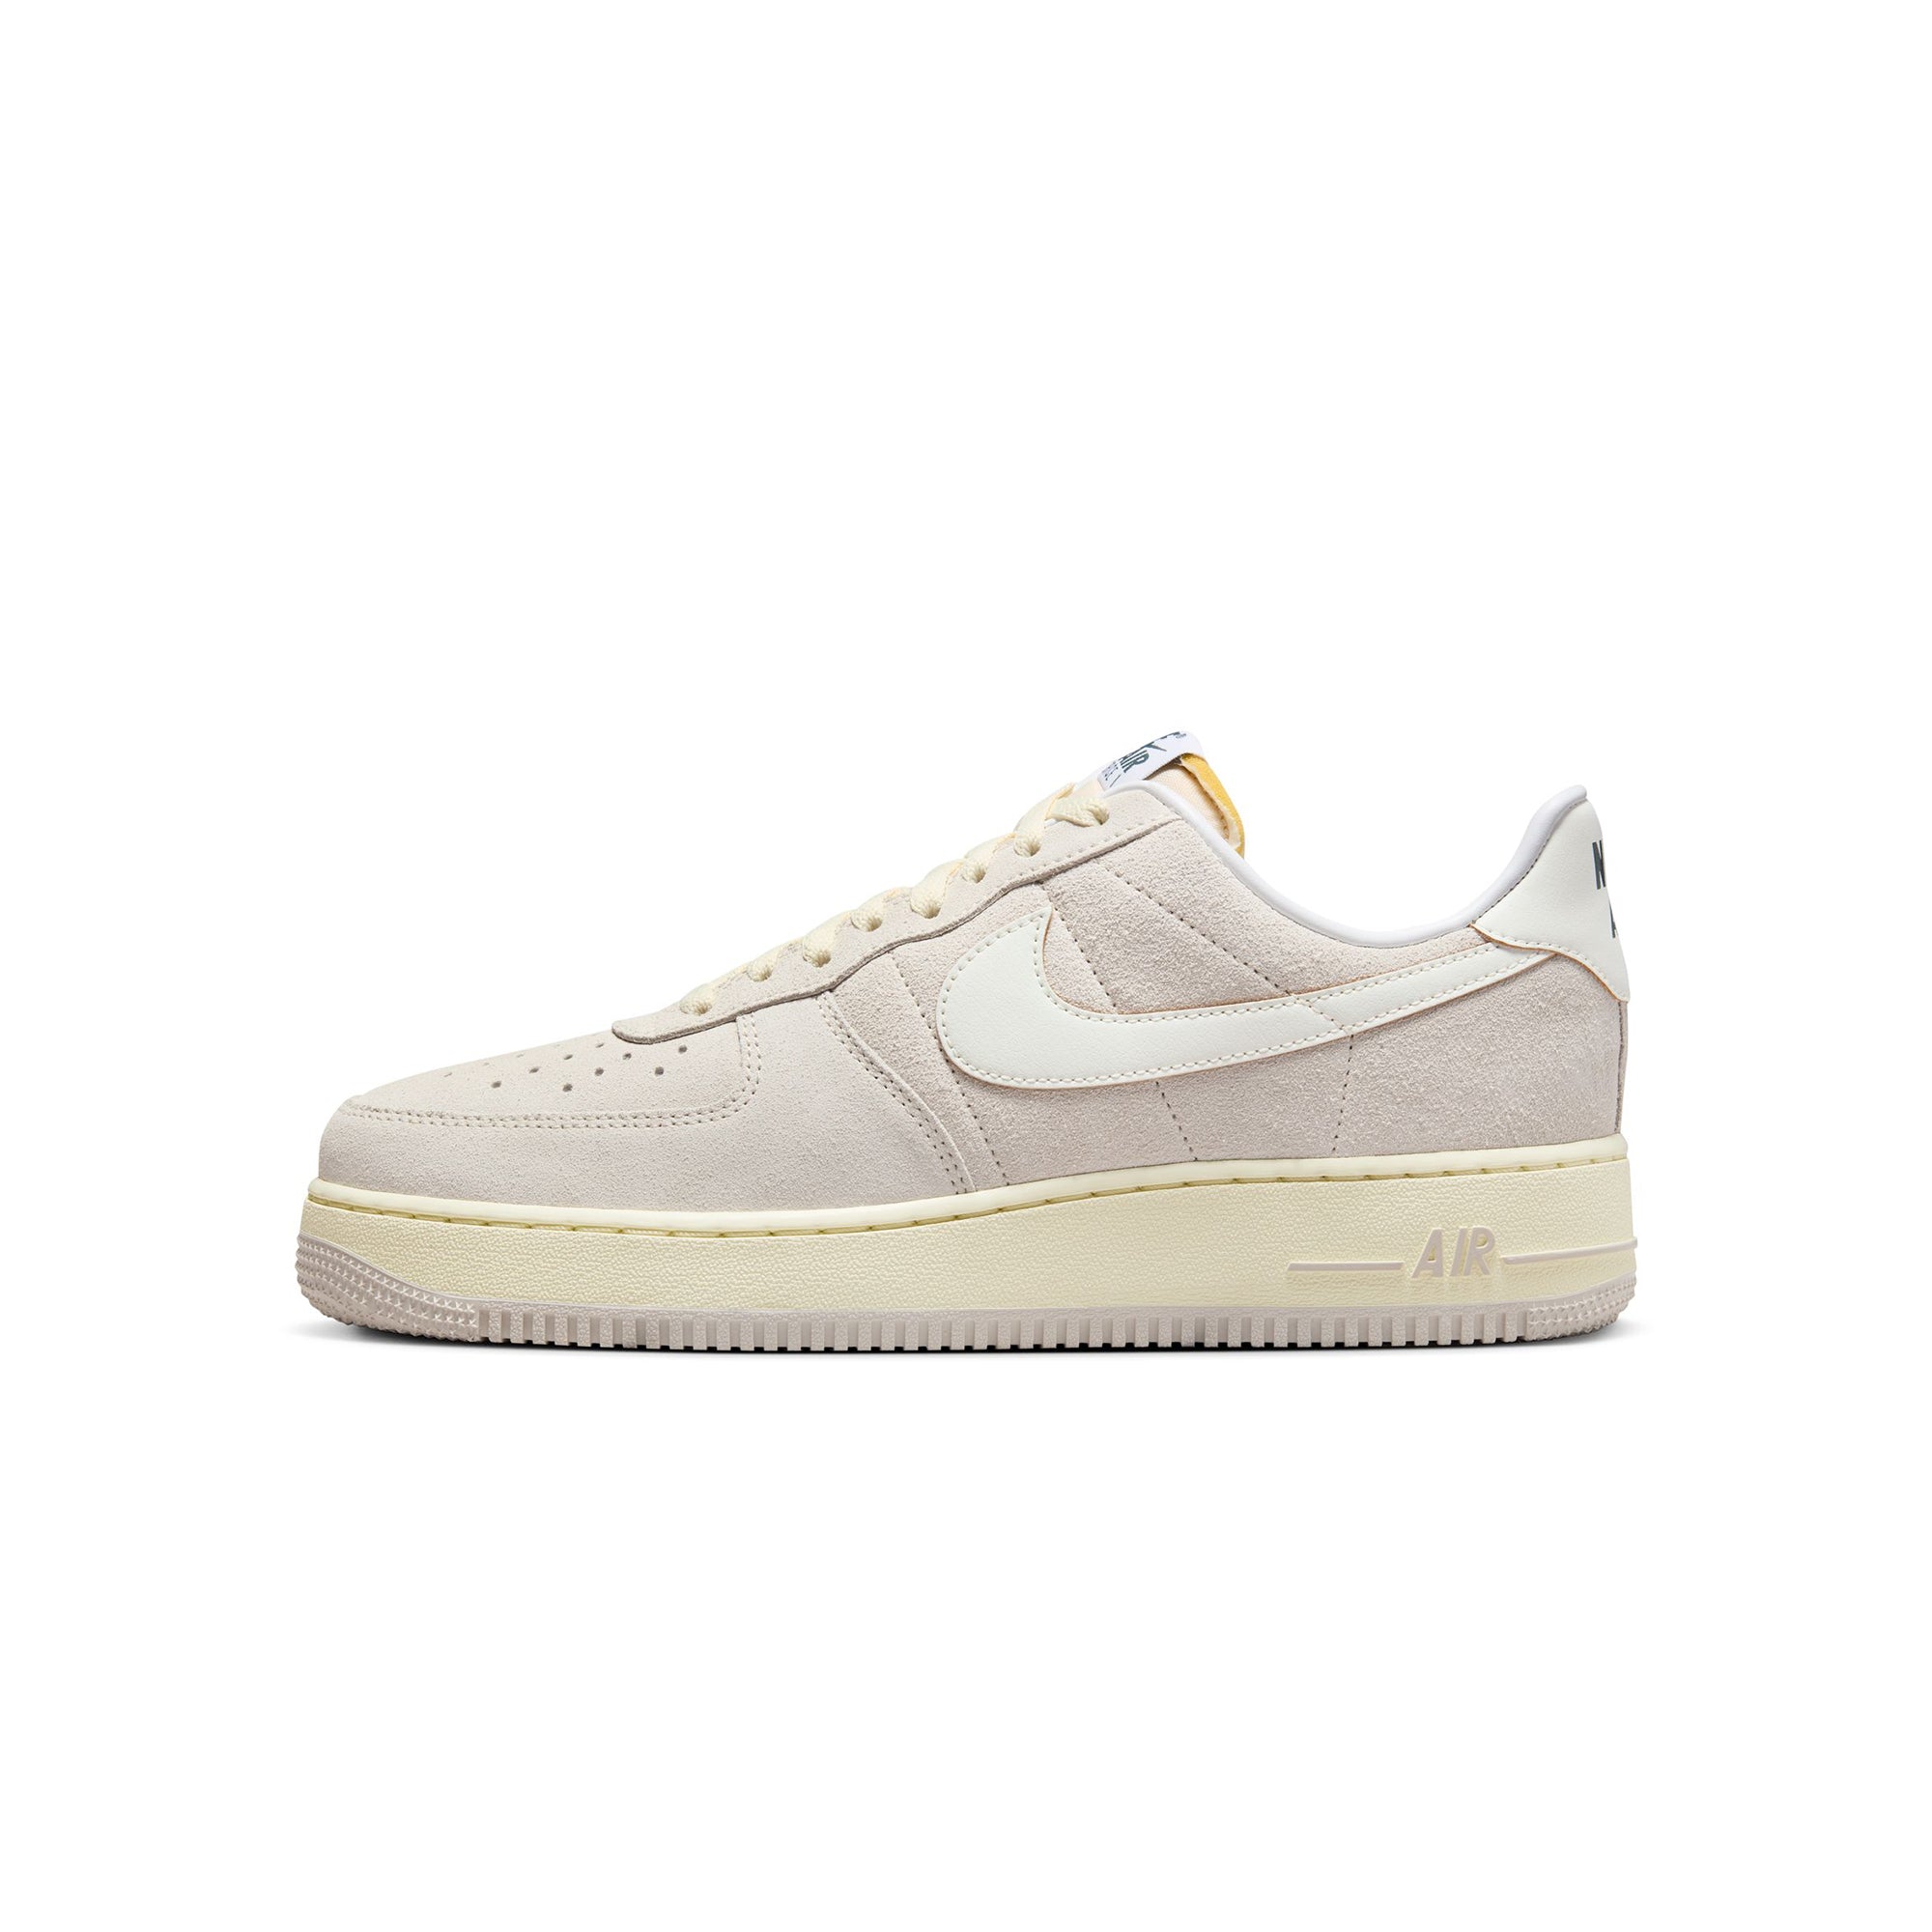 Nike Men's Air Force 1 07 Shoes, Sneakers, Shoes